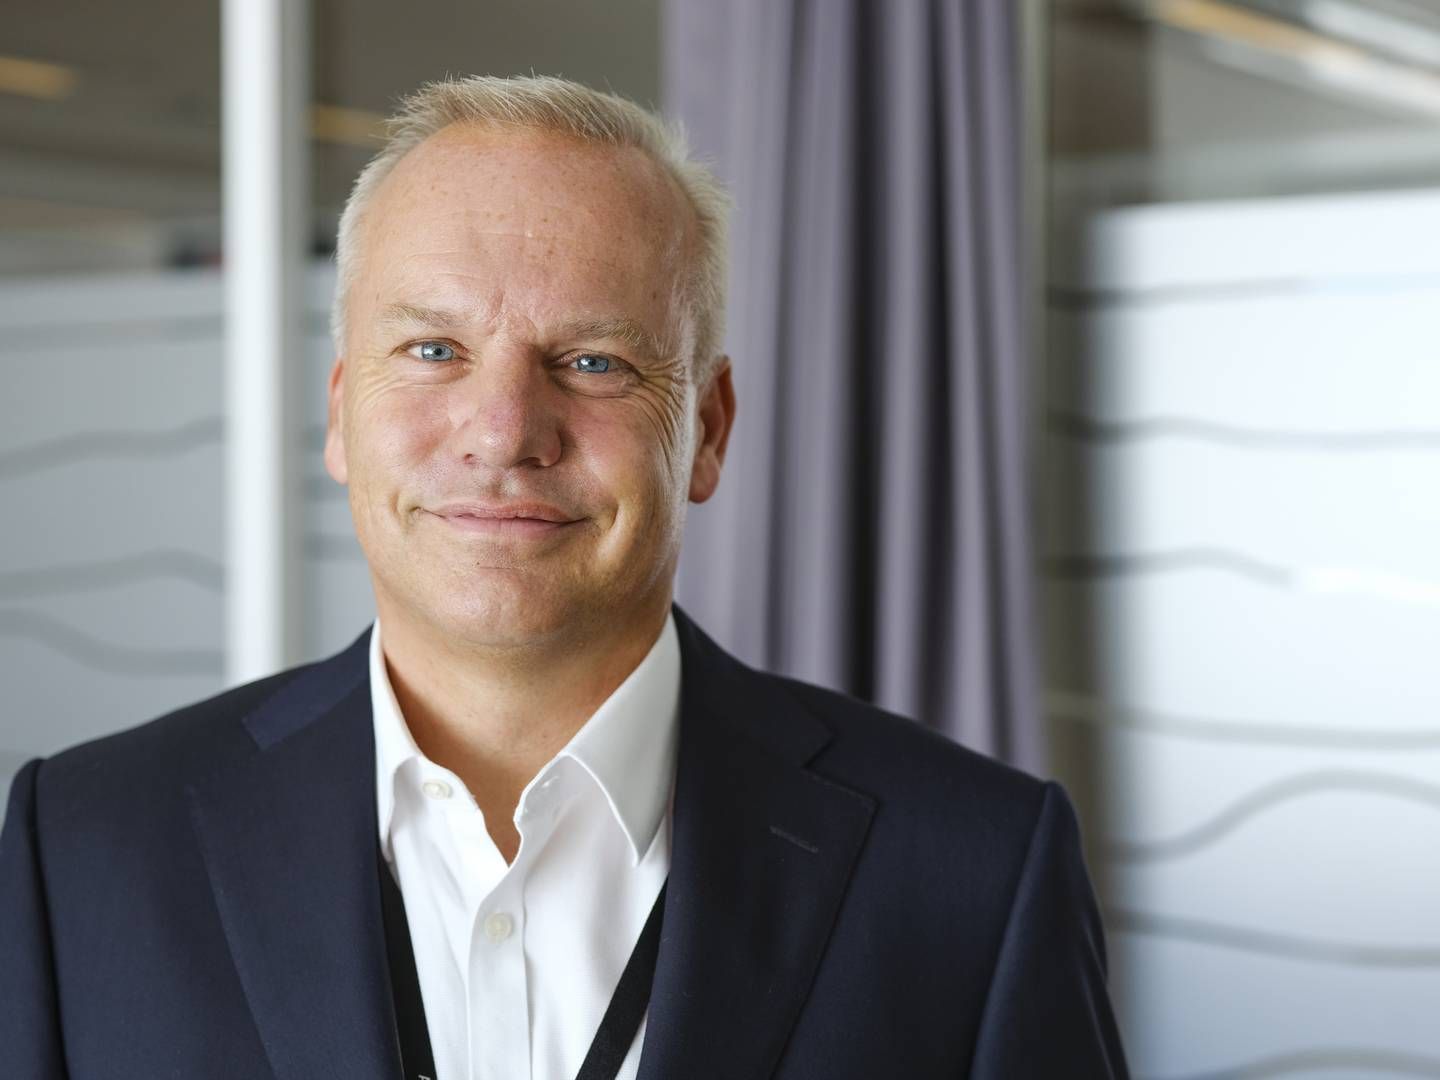 Anders Opedal, CEO of Equinor, has reason to celebrate the energy company's recent financial figures – though he is also concerned about the current safety challenges in the North Sea | Photo: PR / Equinor / Ole Jørgen Bratland